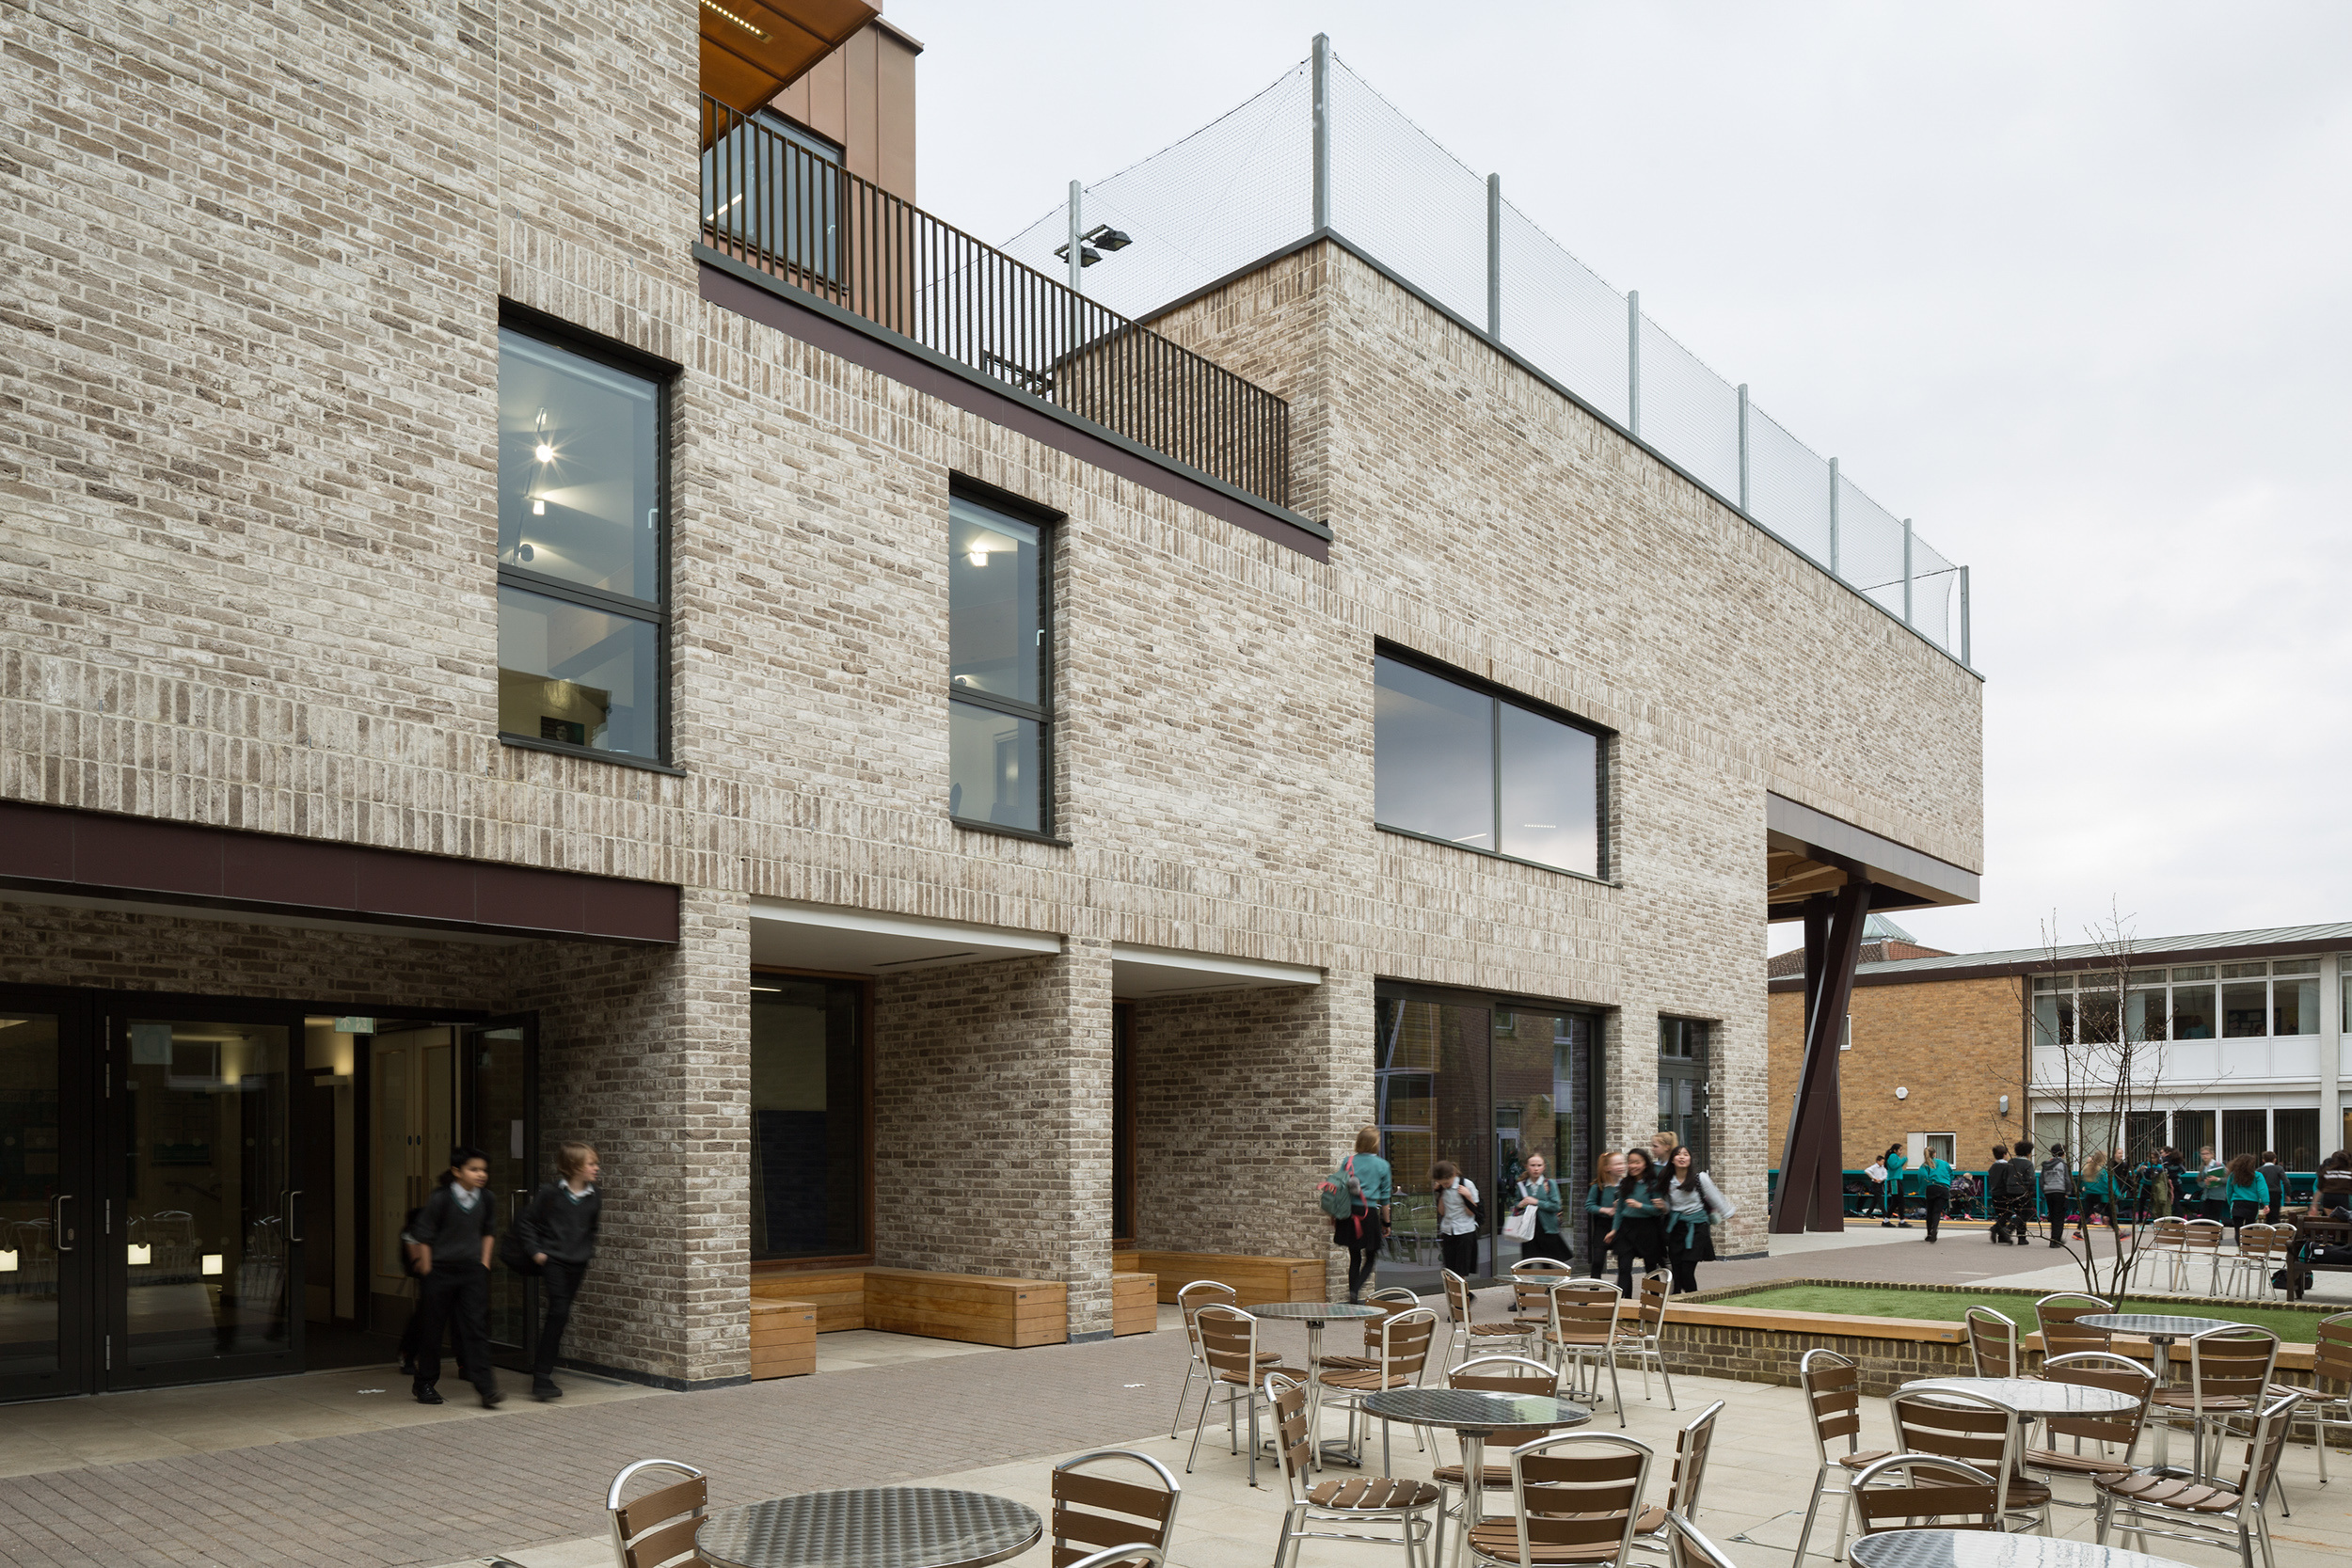 View of stephen perse foundation sports learning school entrance from outdoor seating | cambridge architects CDC studio